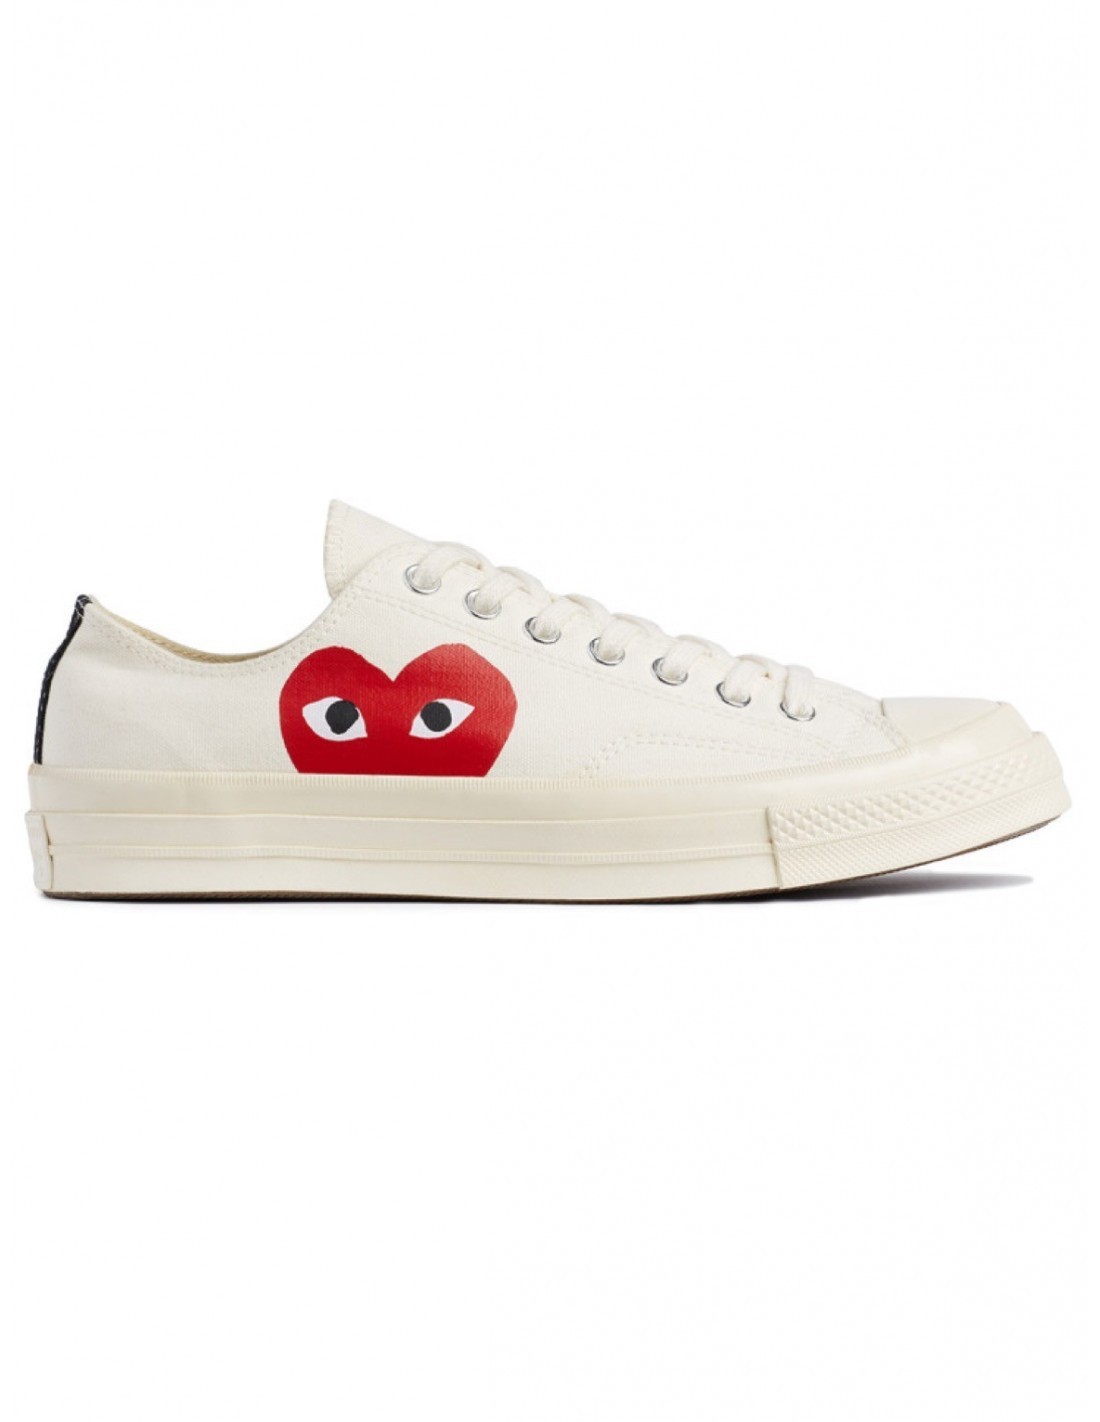 GARCONS PLAY x CONVERSE low sneakers 